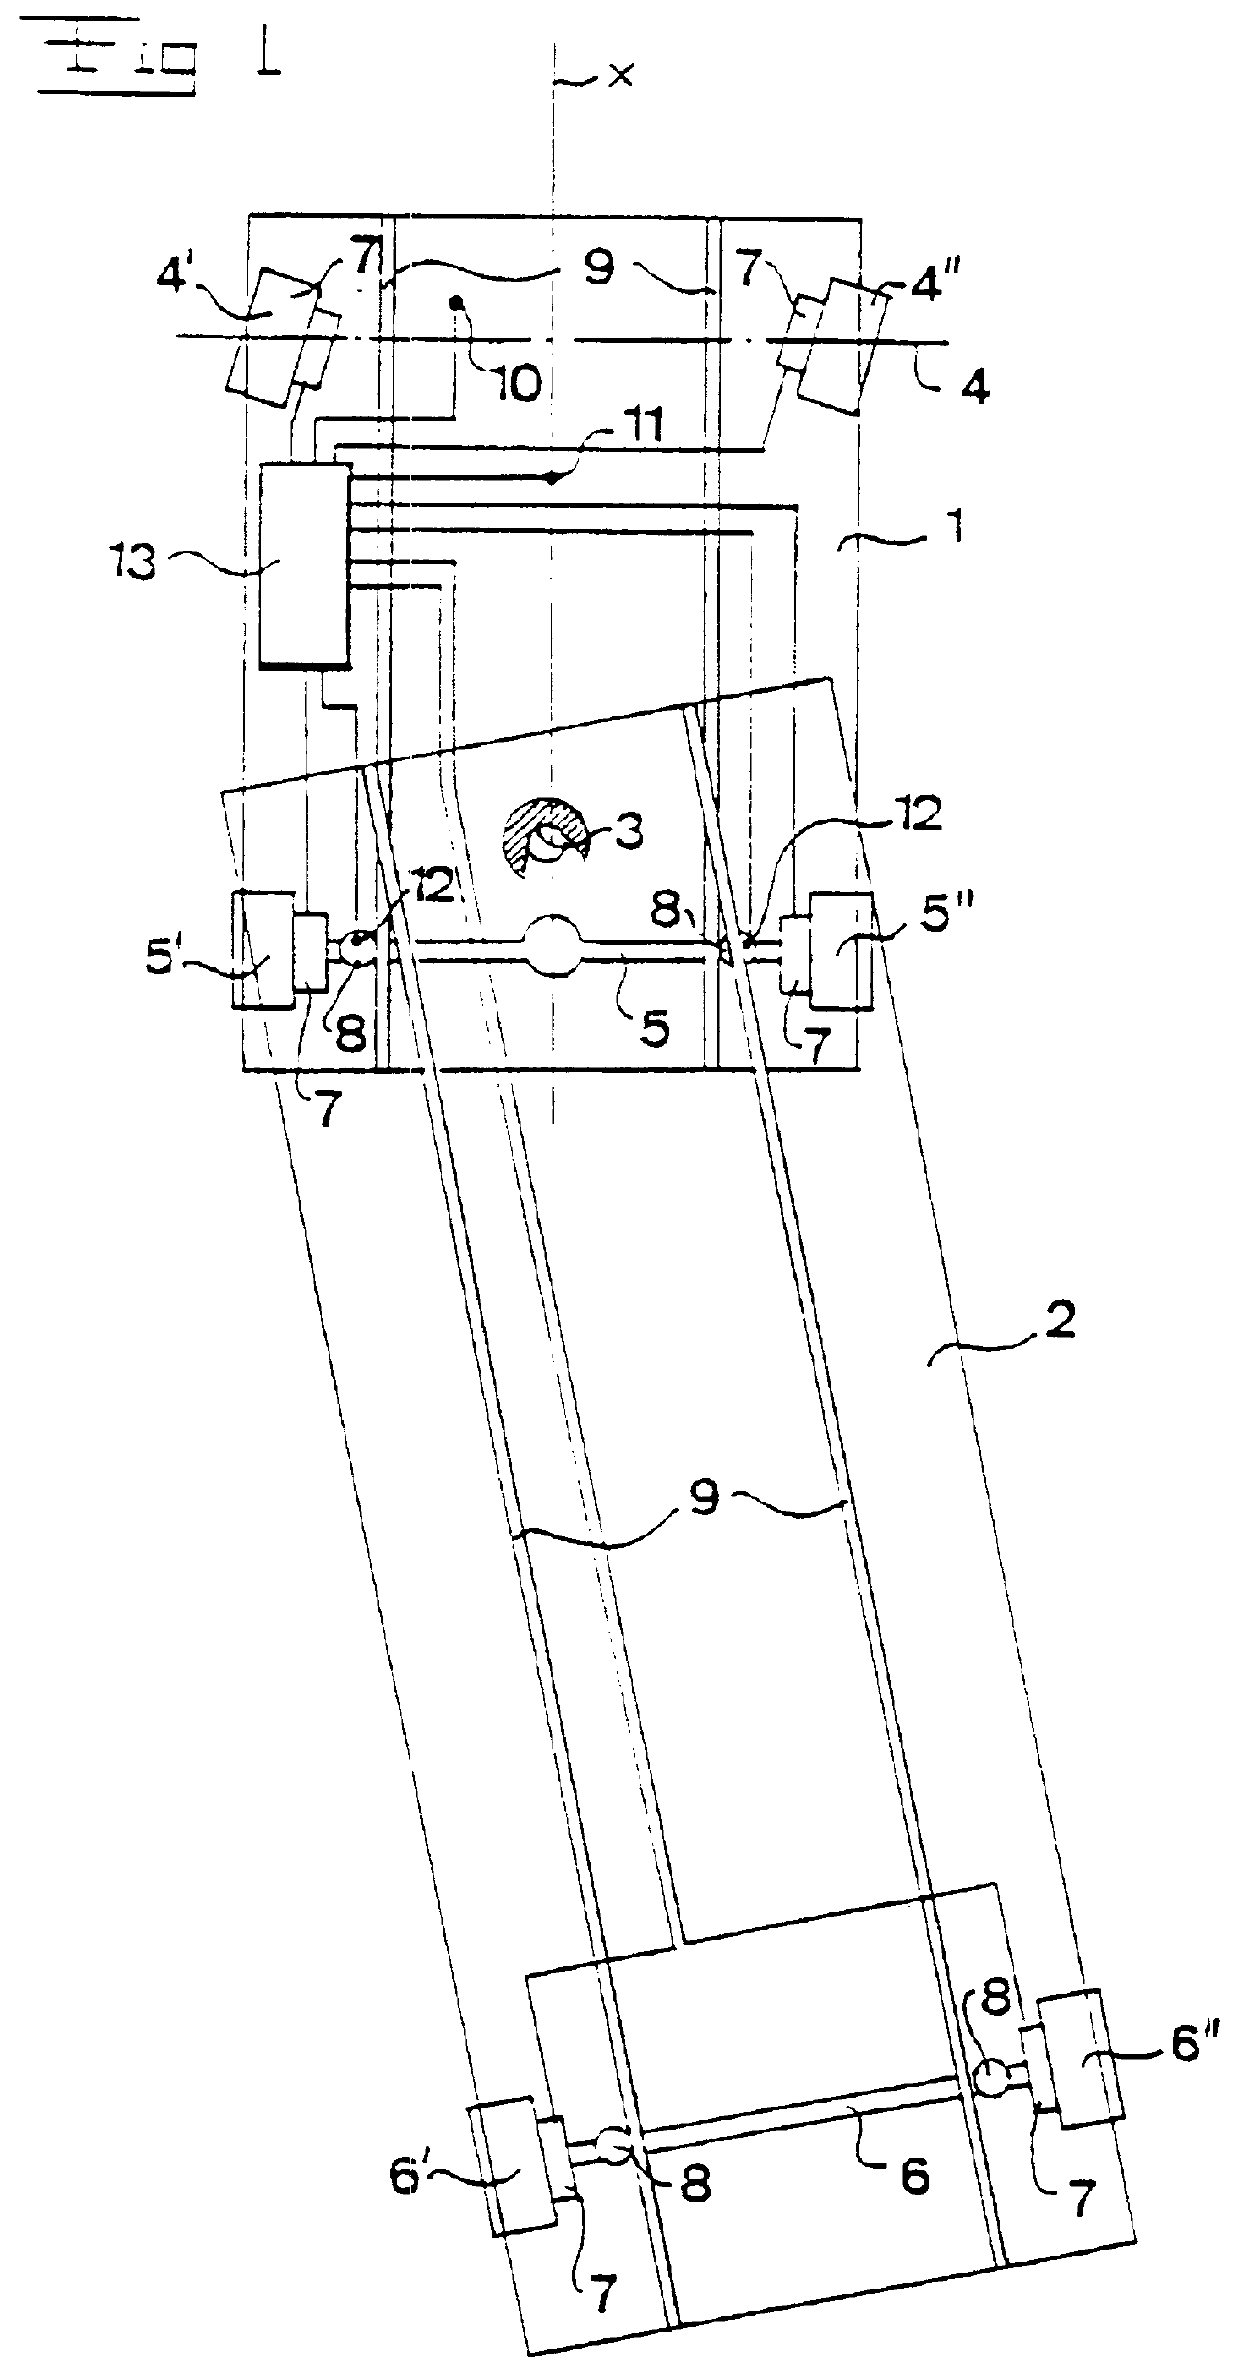 Device for a vehicle